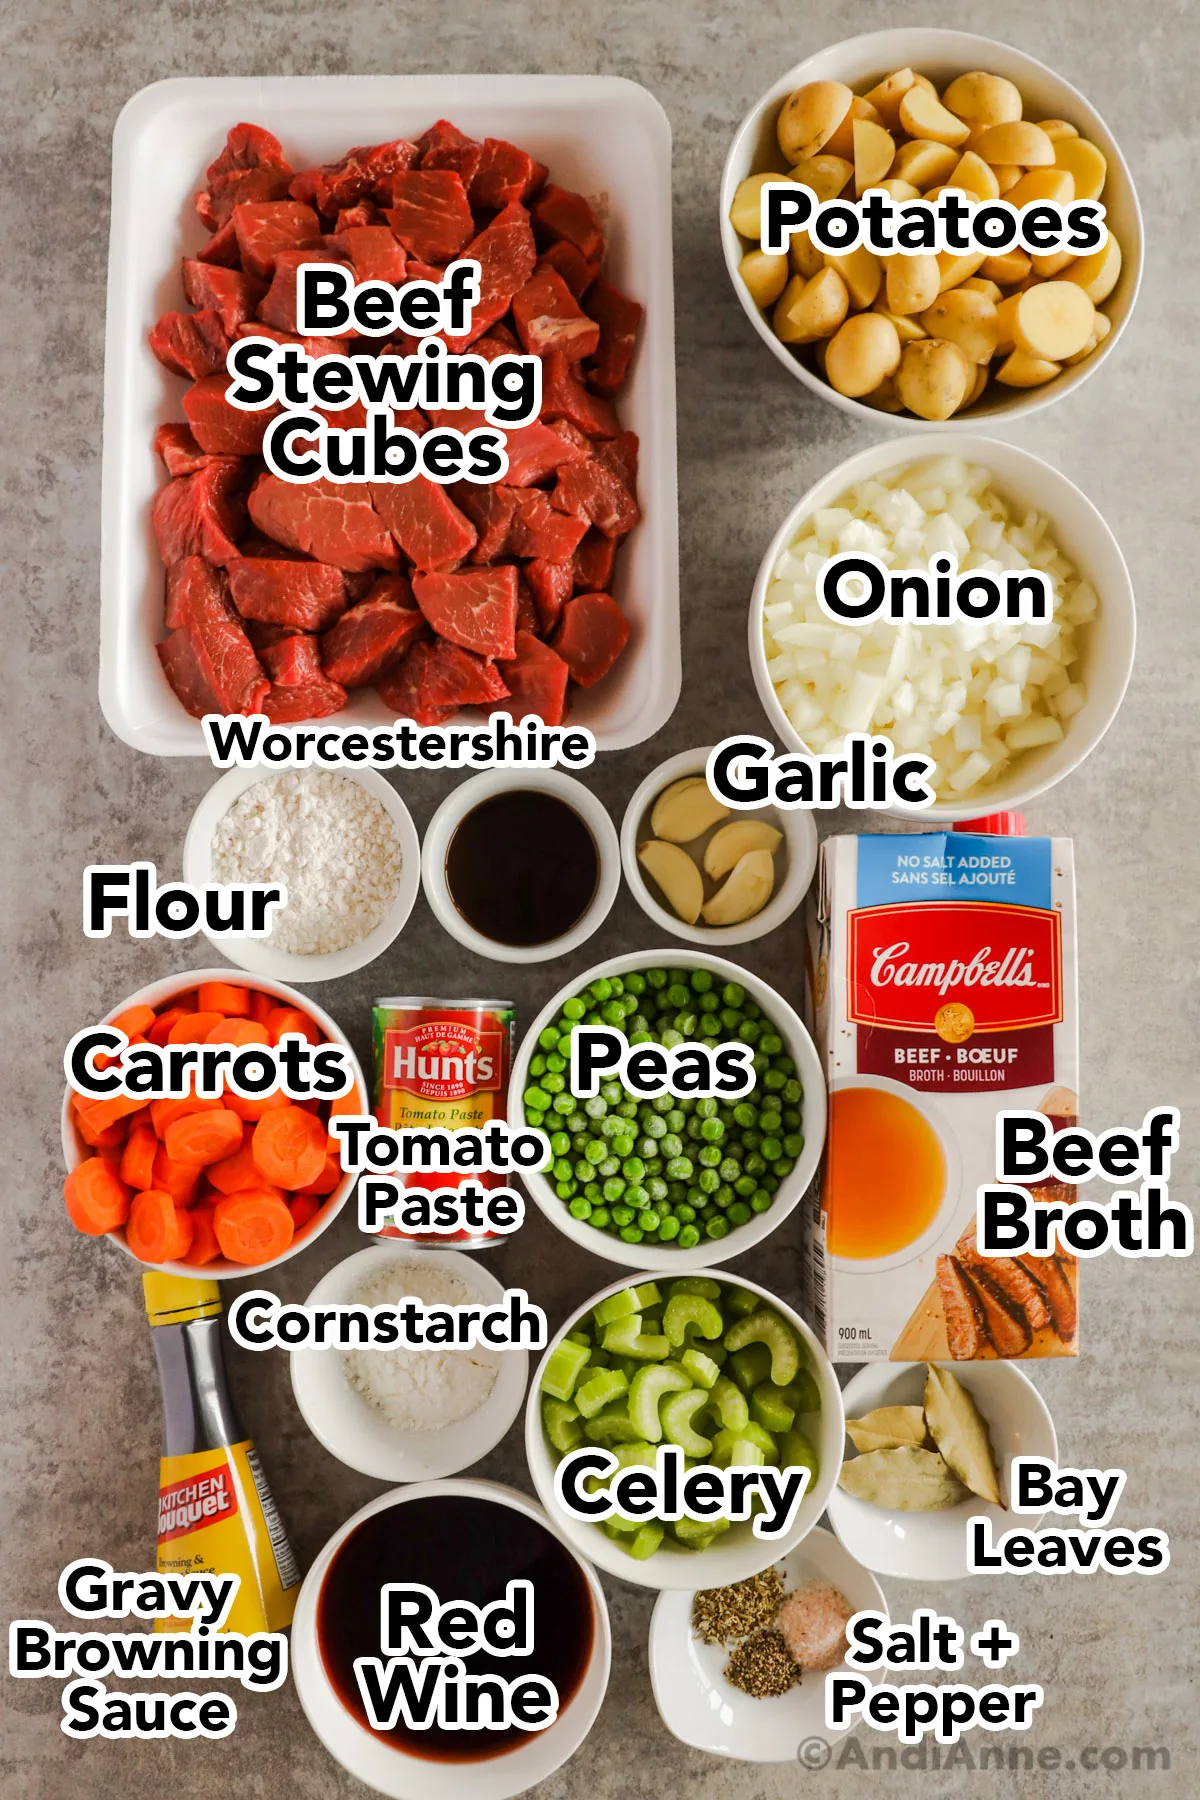 Overhead view of all the ingredients in bowls on the table. Beef cubes, potatoes, onion, Worcestershire, garlic, flour, carrots, tomato paste, peas, beef broth, cornstarch celery, bay leaves, salt, pepper, red wine, and gravy browning sauce. 